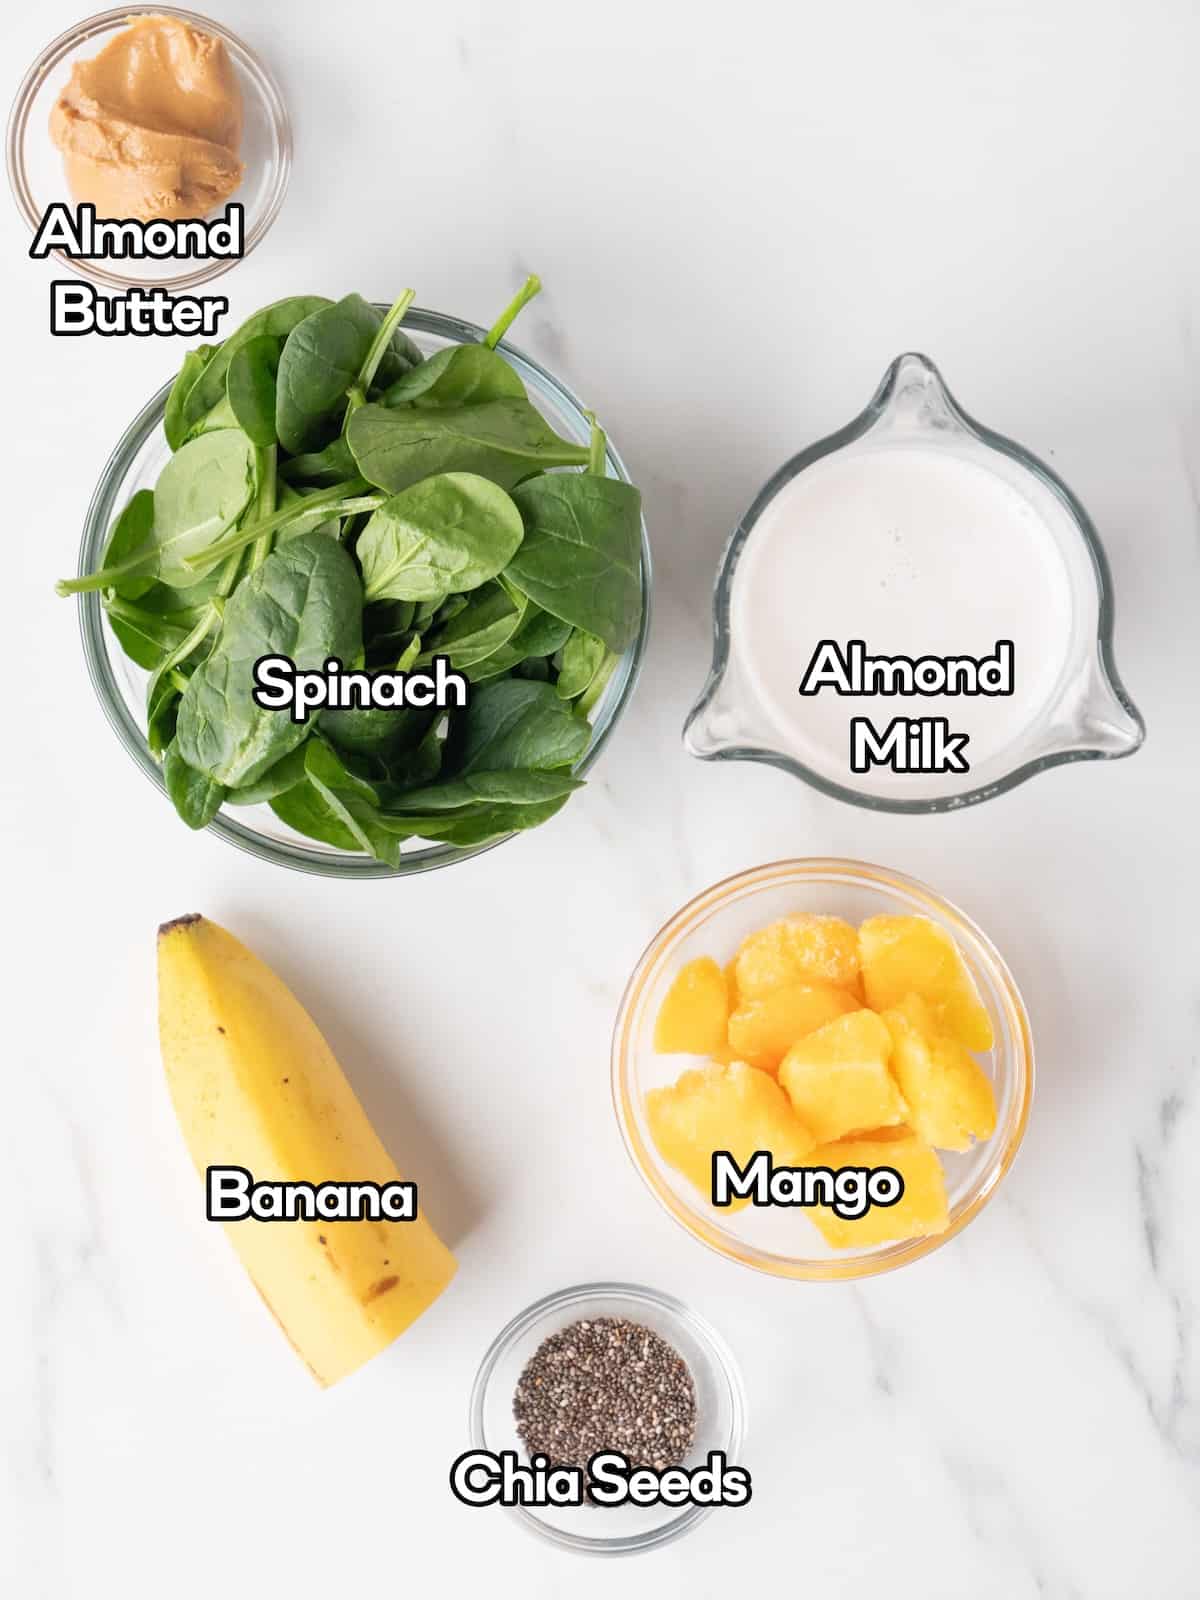 Mise en place of all ingredients to make Breakfast Spinach Smoothie.